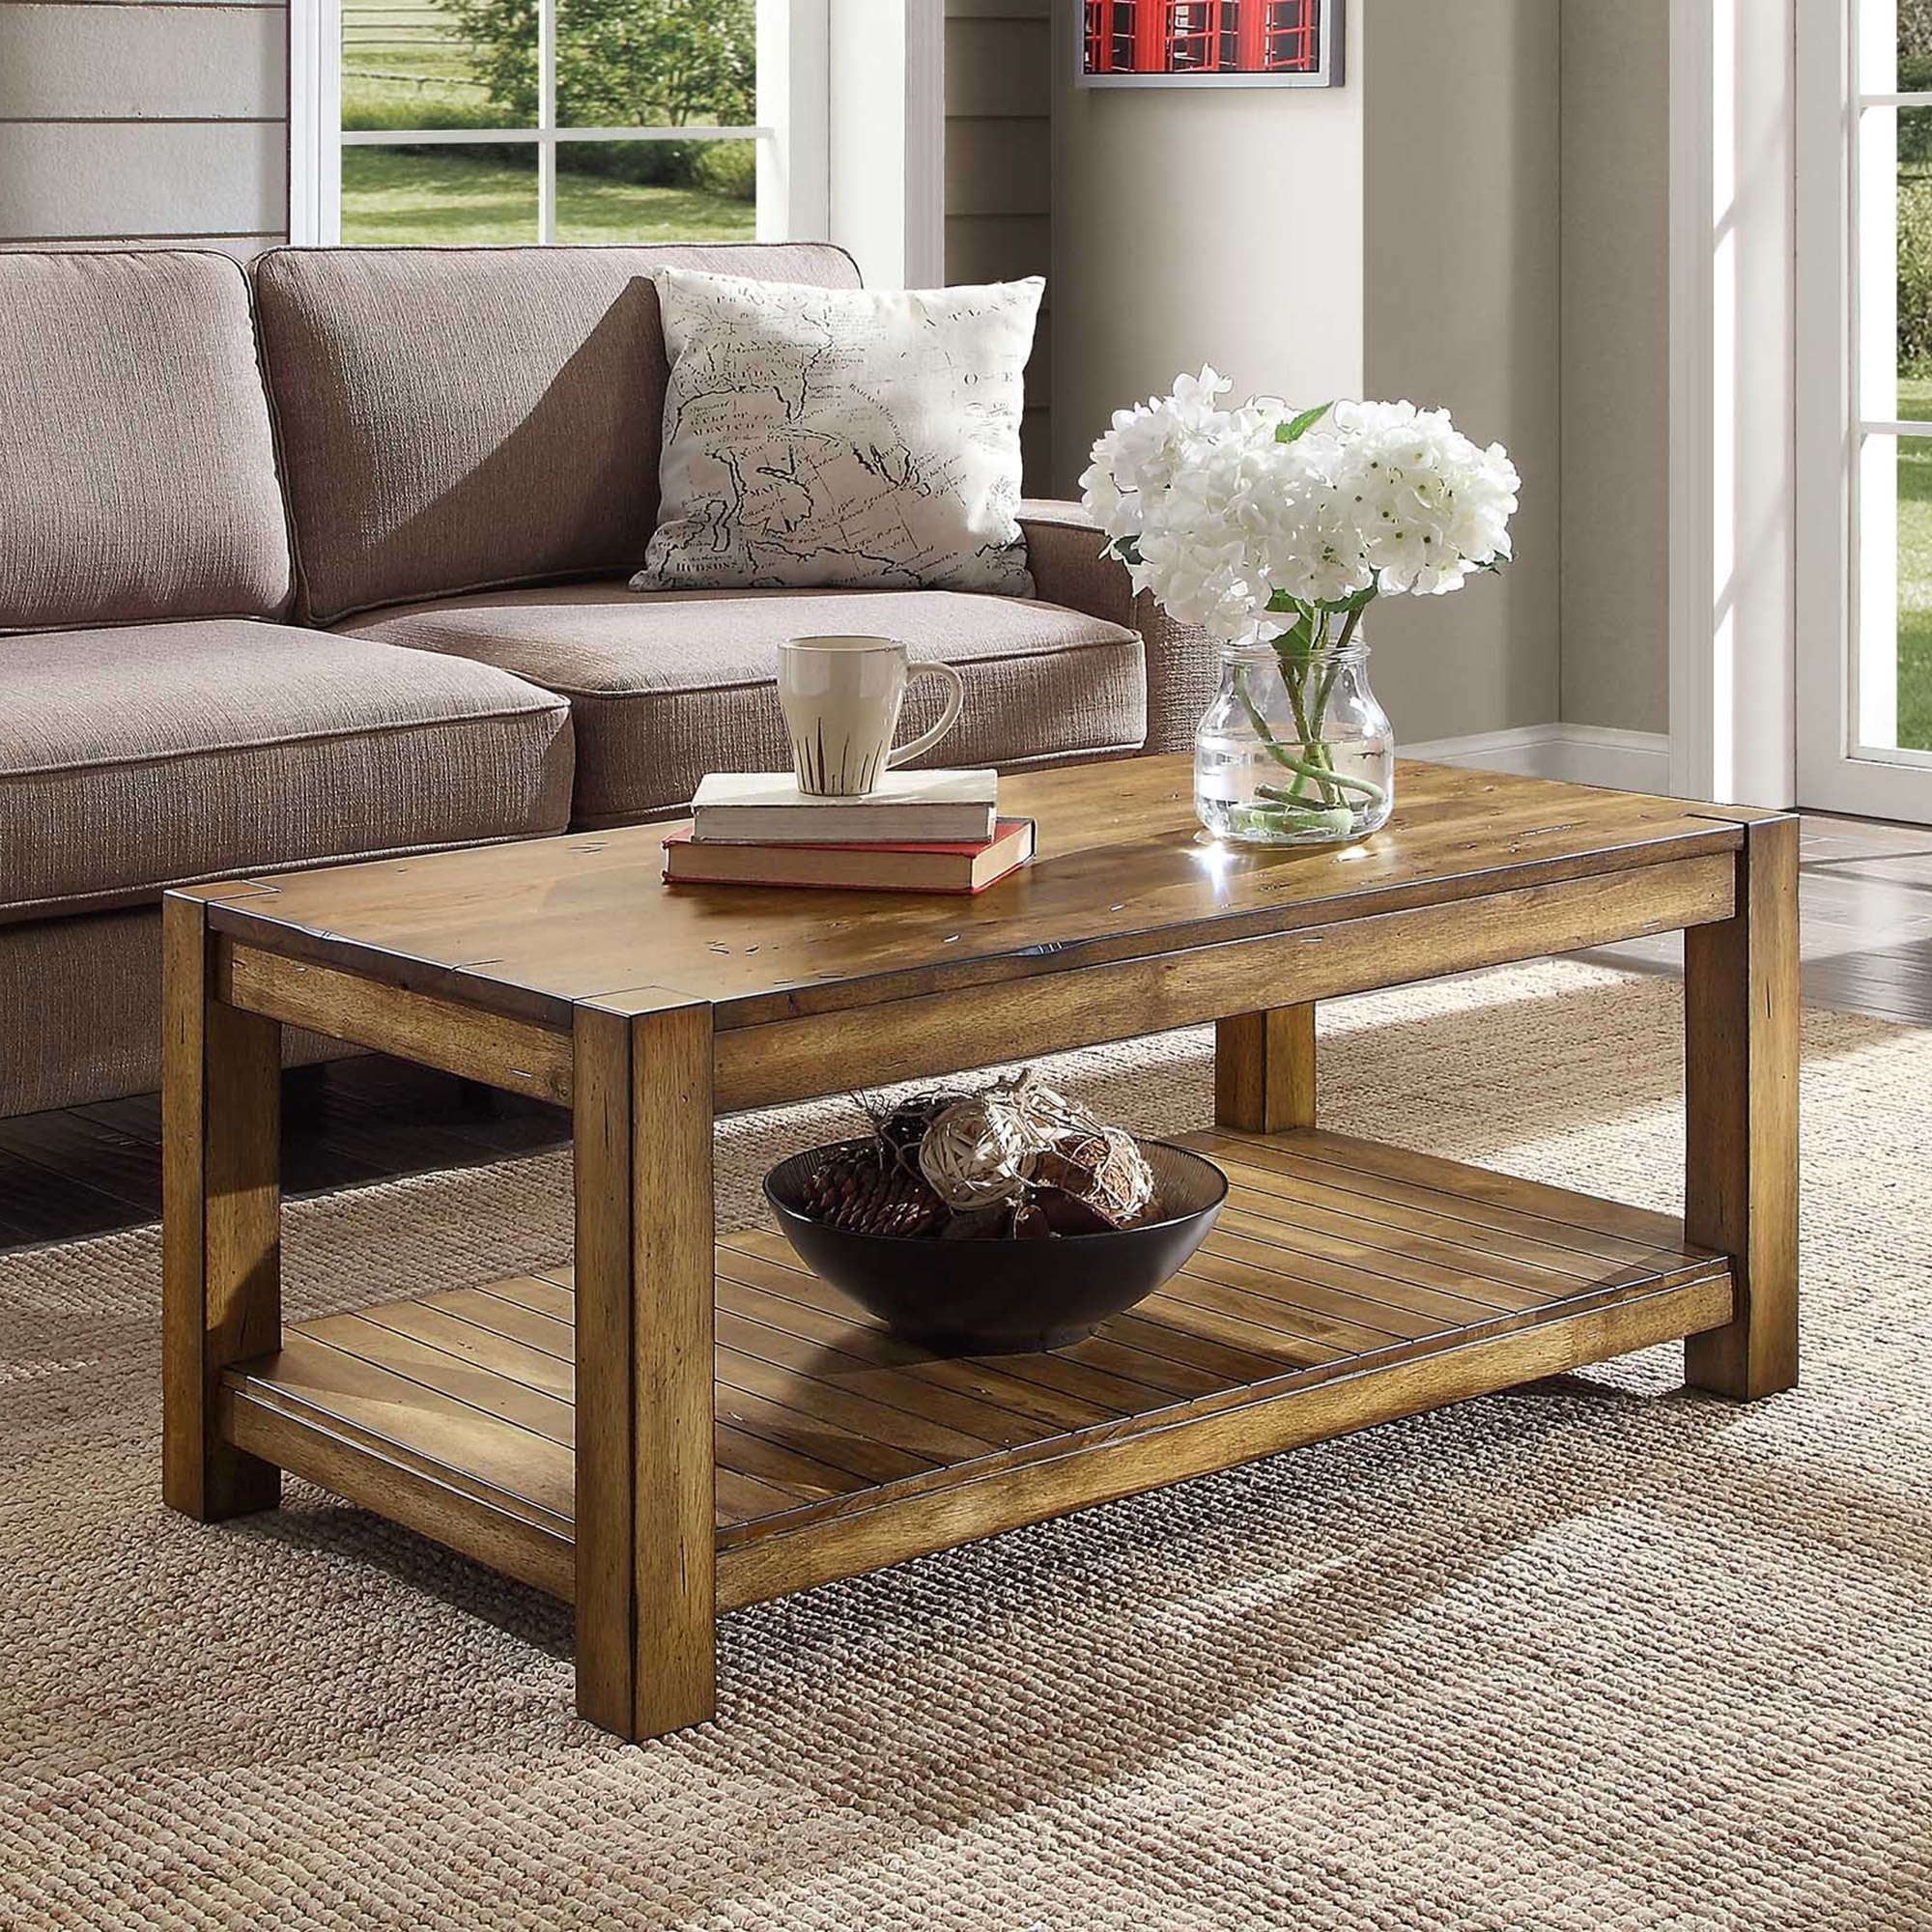 Bryant Solid Wood Coffee Table, Rustic Maple Brown Finish – Walmart With Regard To Rustic Wood Coffee Tables (Gallery 4 of 21)